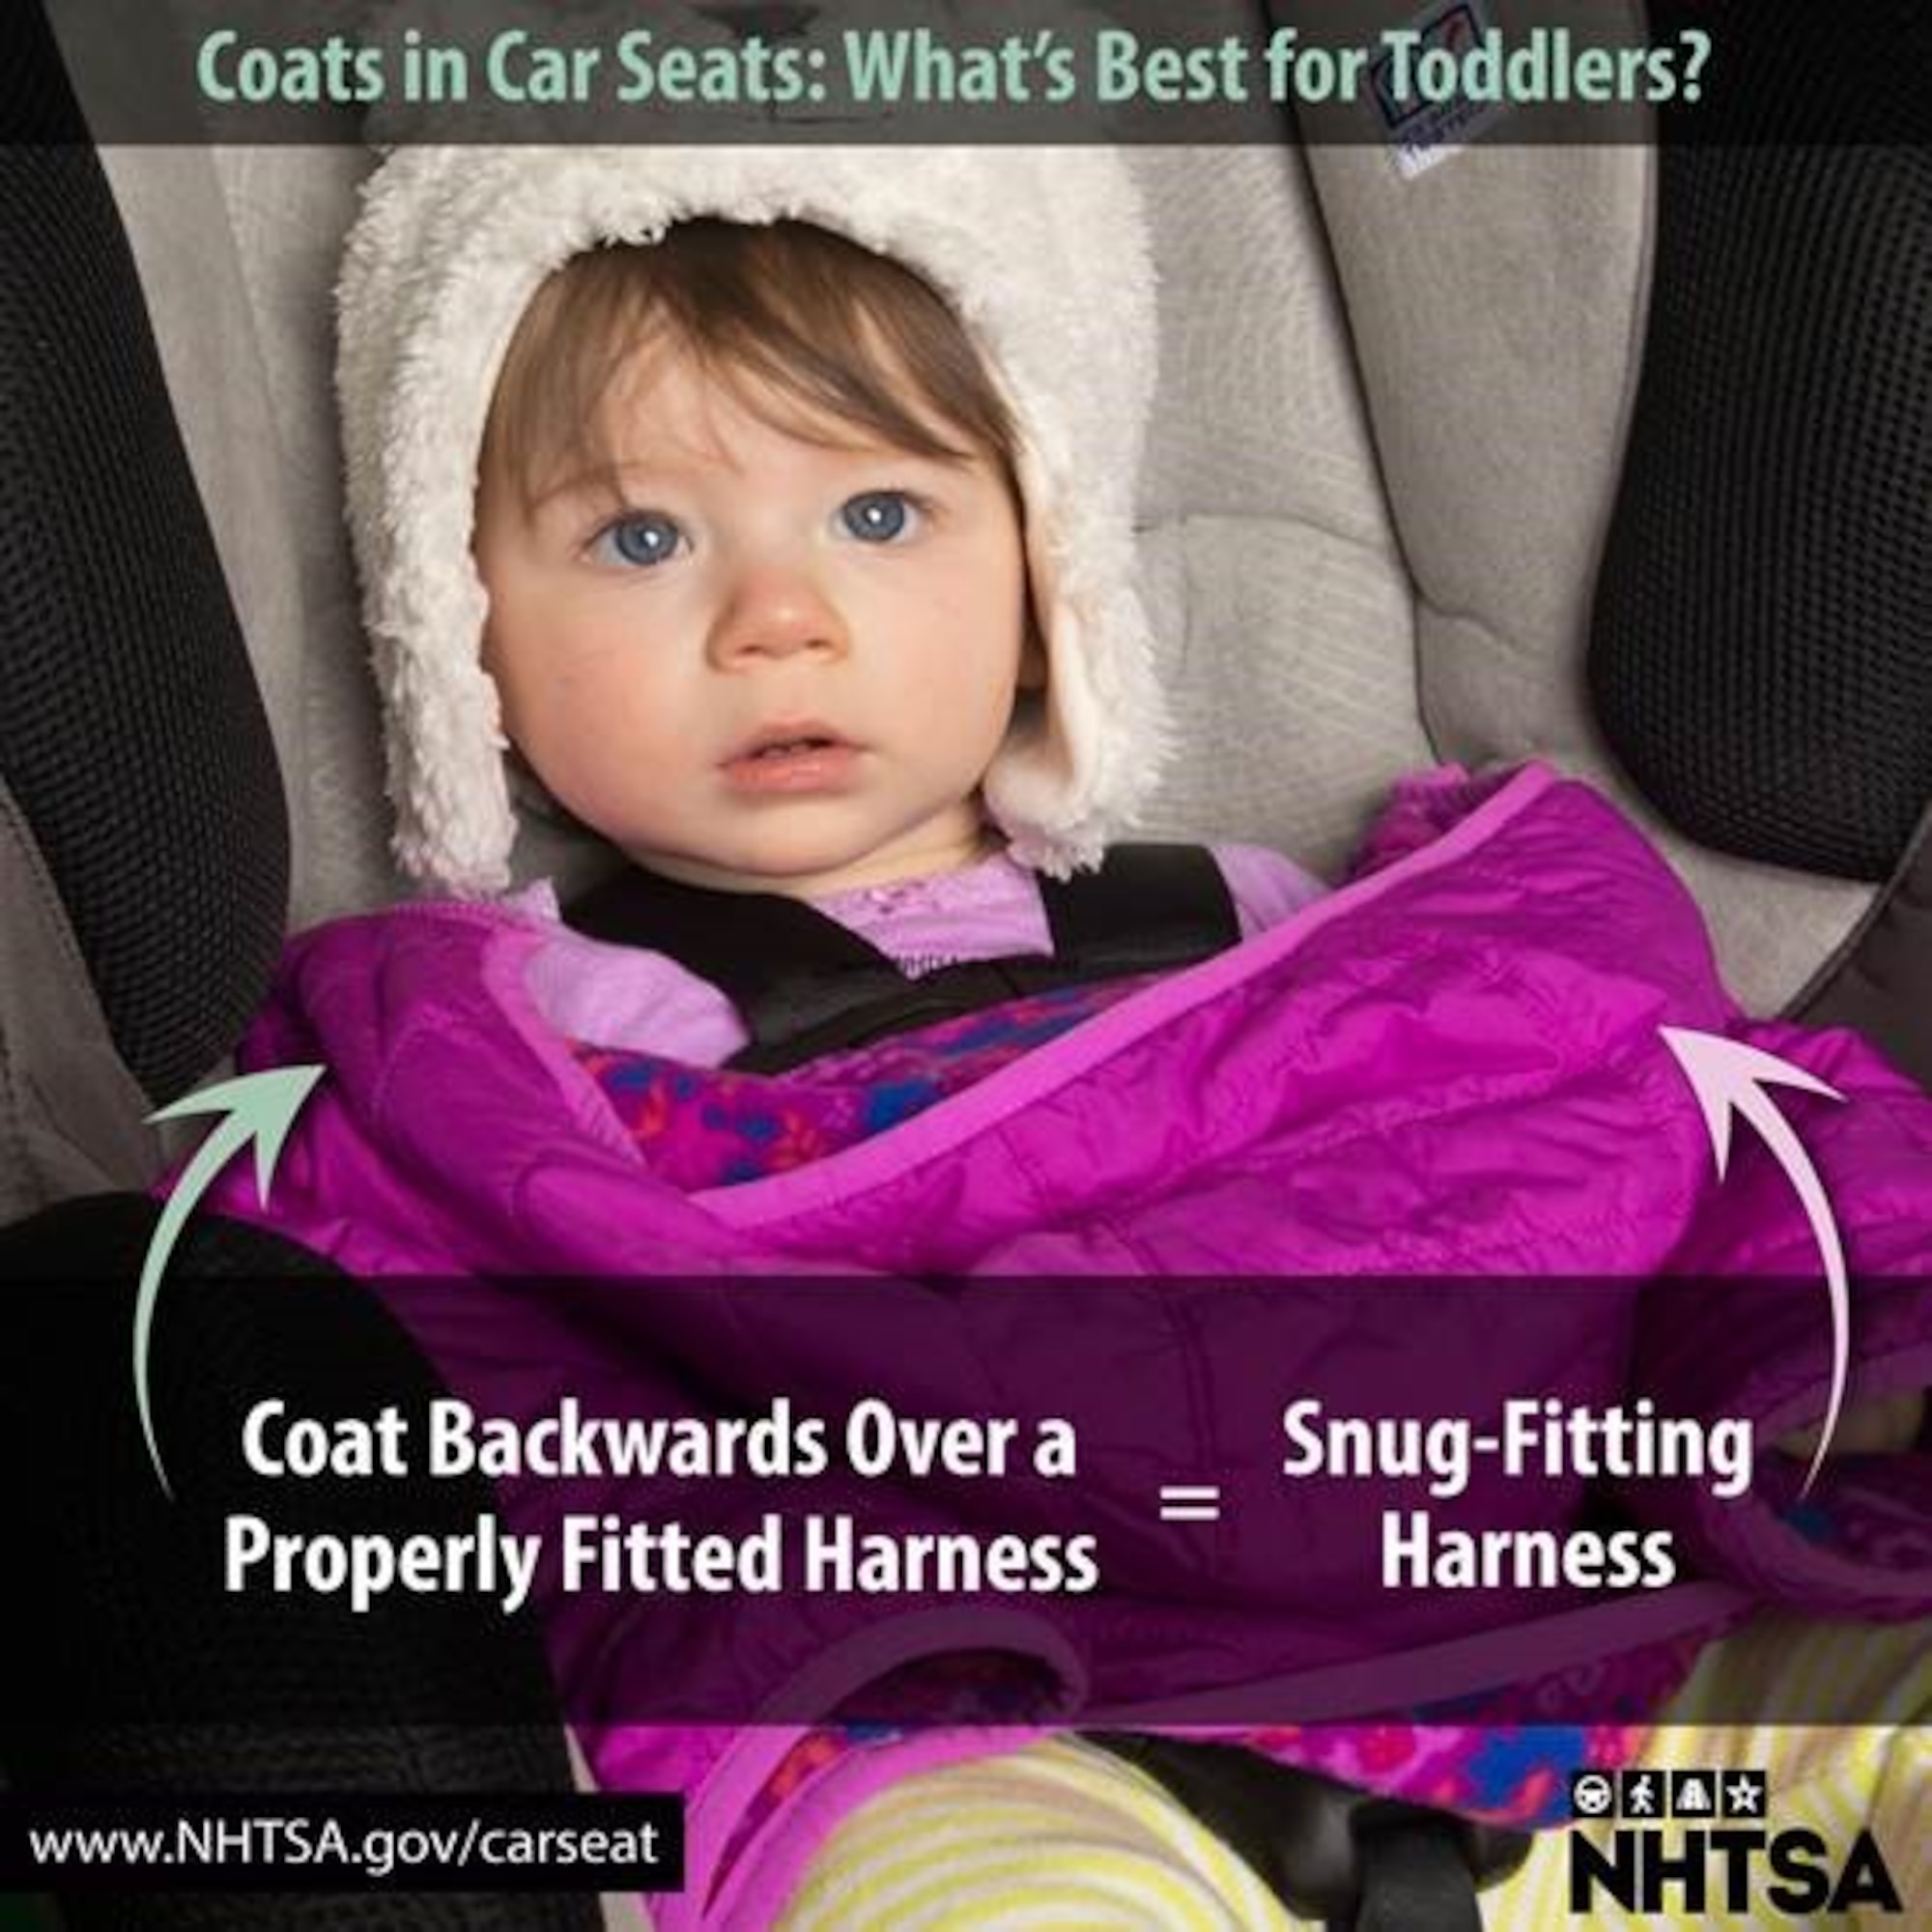 Coats in car seats: What's best for toddlers info-graphic.